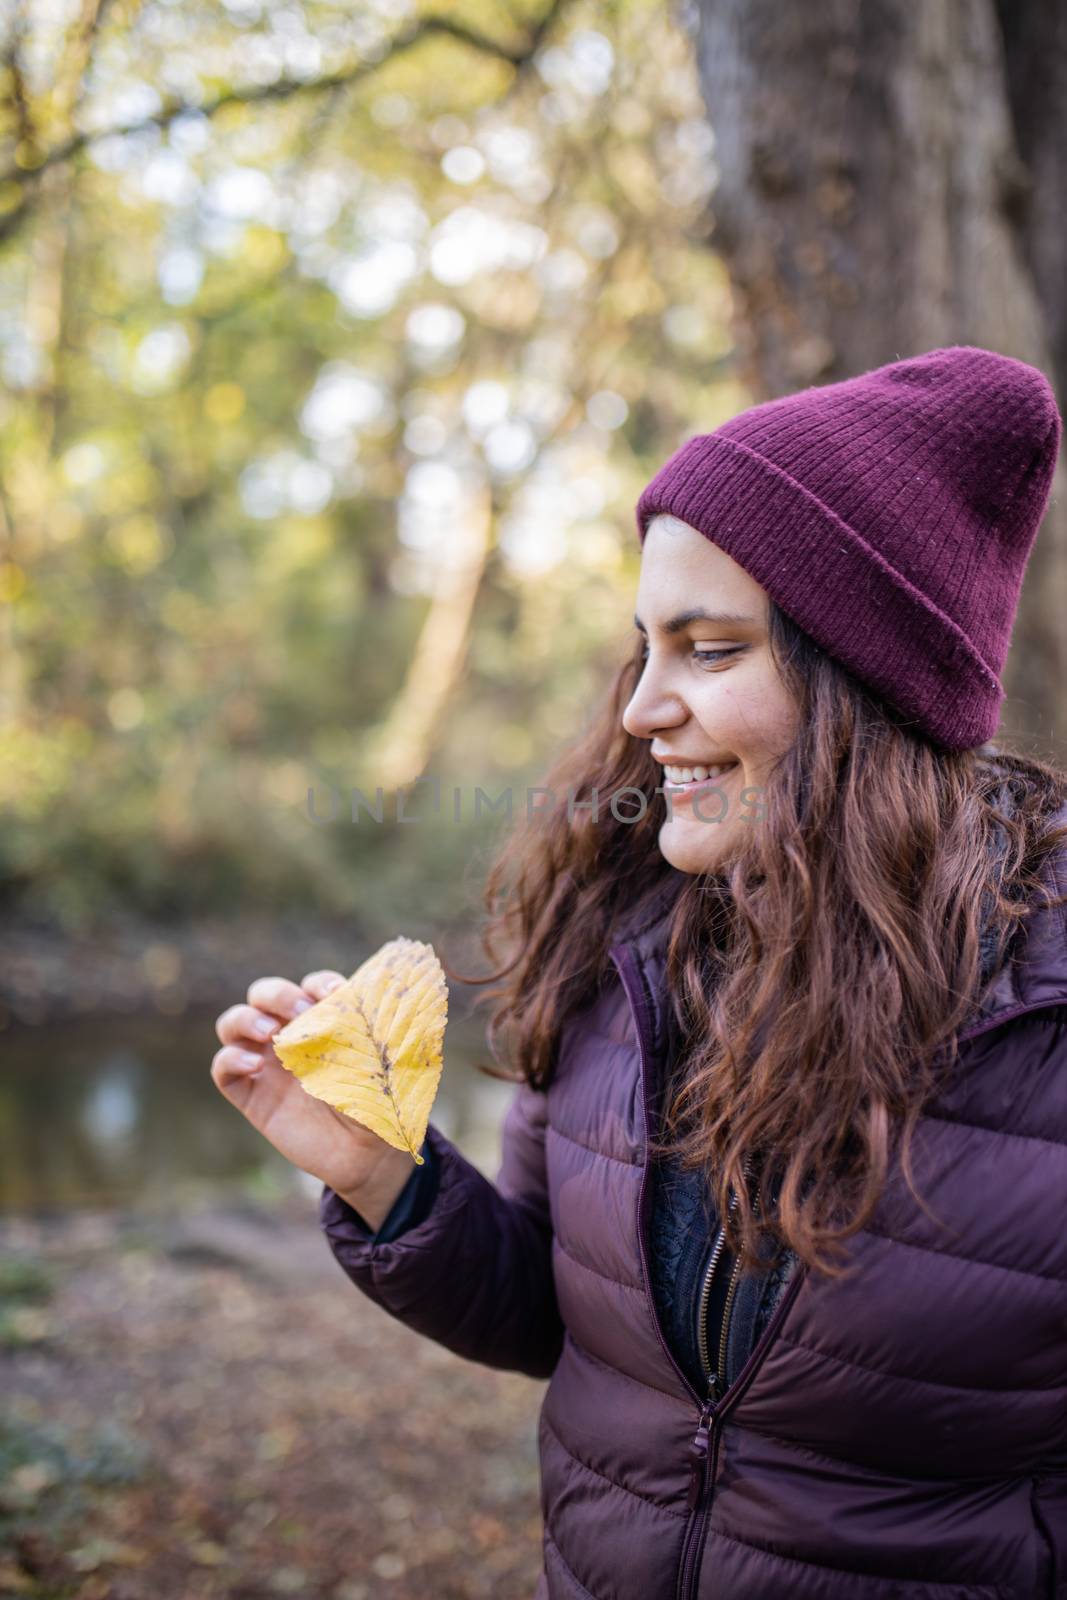 Happy woman smiling and holding an autumn leaf in the forest. Portrait of woman wearing knitted hat in forest. Adventurous day in nature